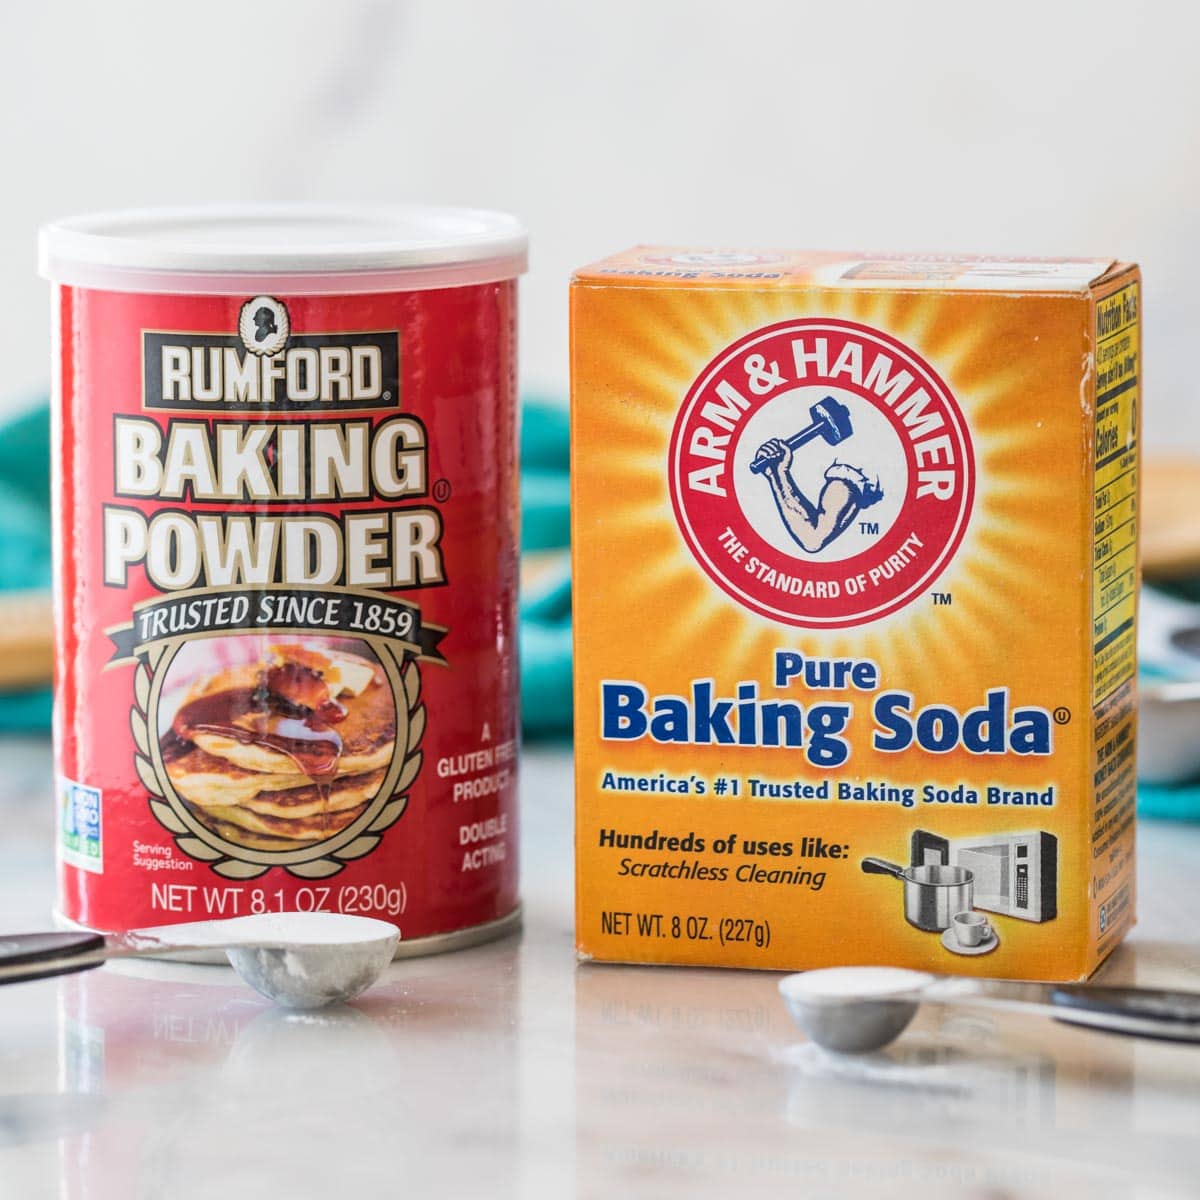 This Is the Right Place To Store Your Baking Powder